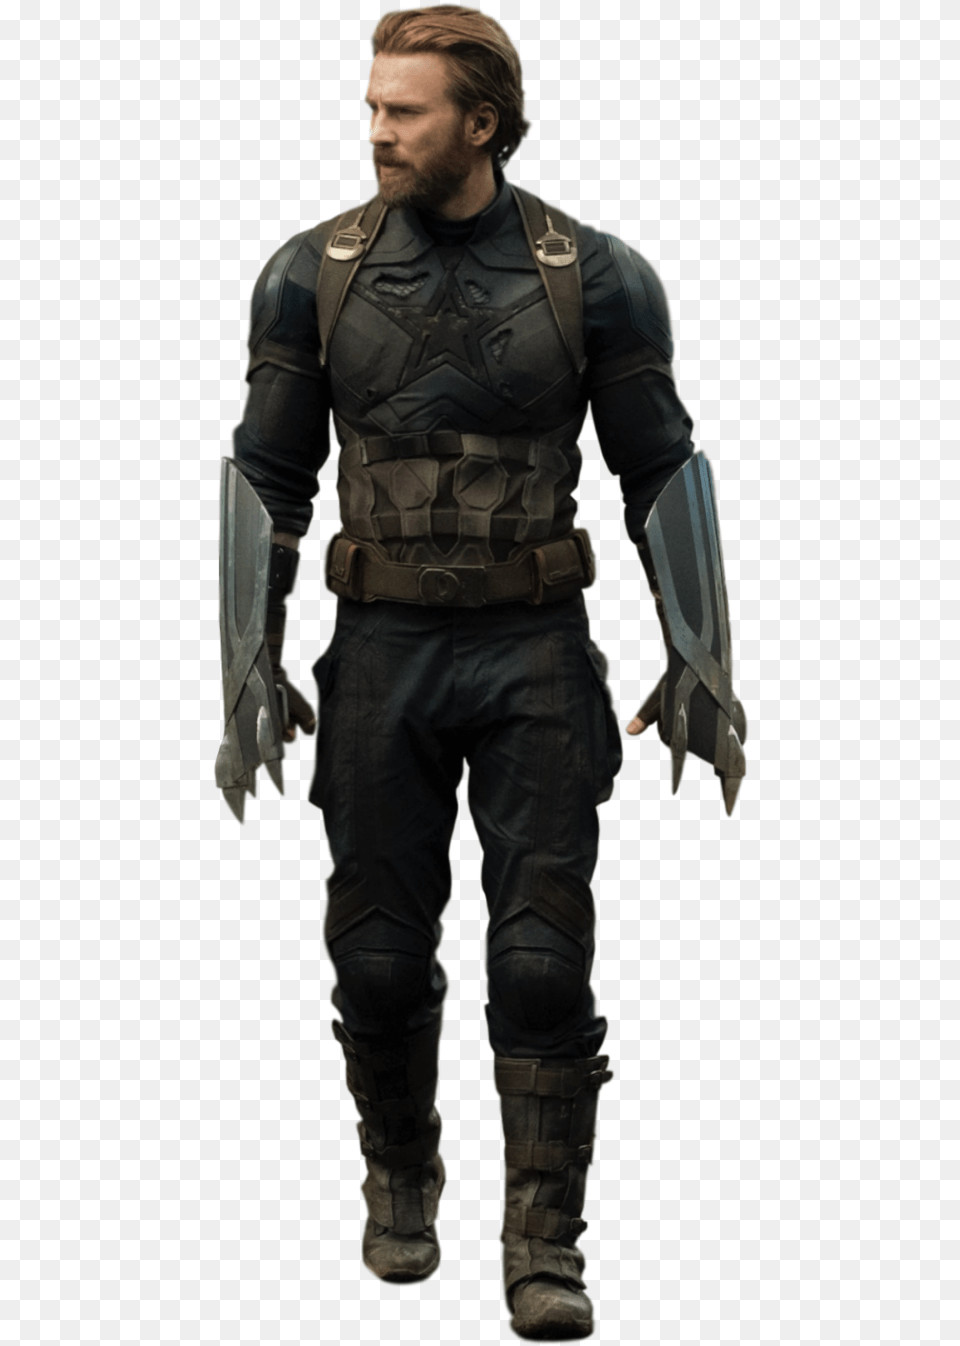 Captain America Infinity War Costume, Adult, Male, Man, Person Free Png Download